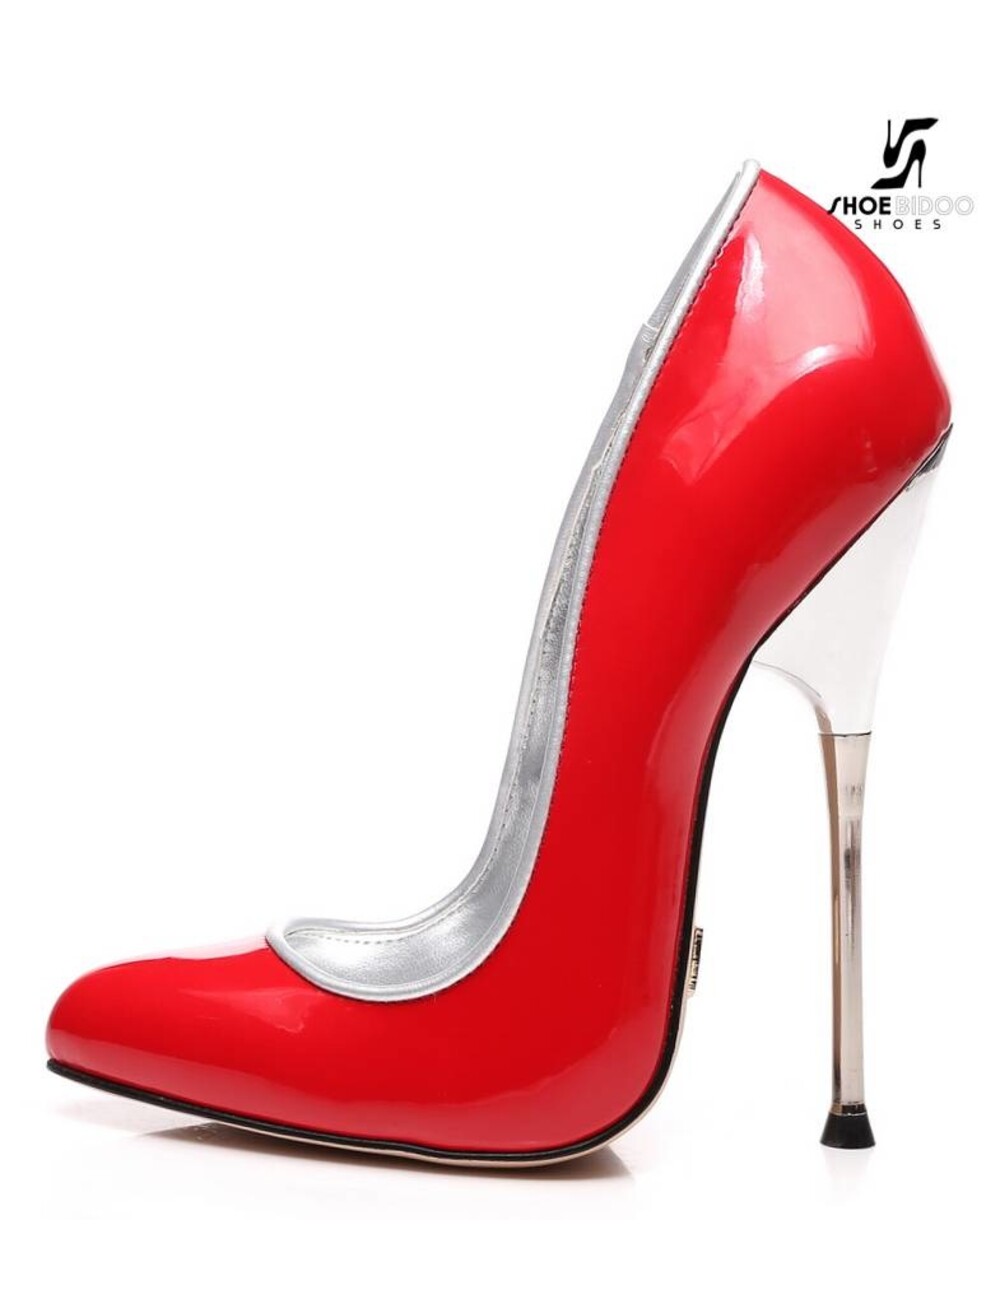 Giaro Red patent pumps with ultra high silver metal heels